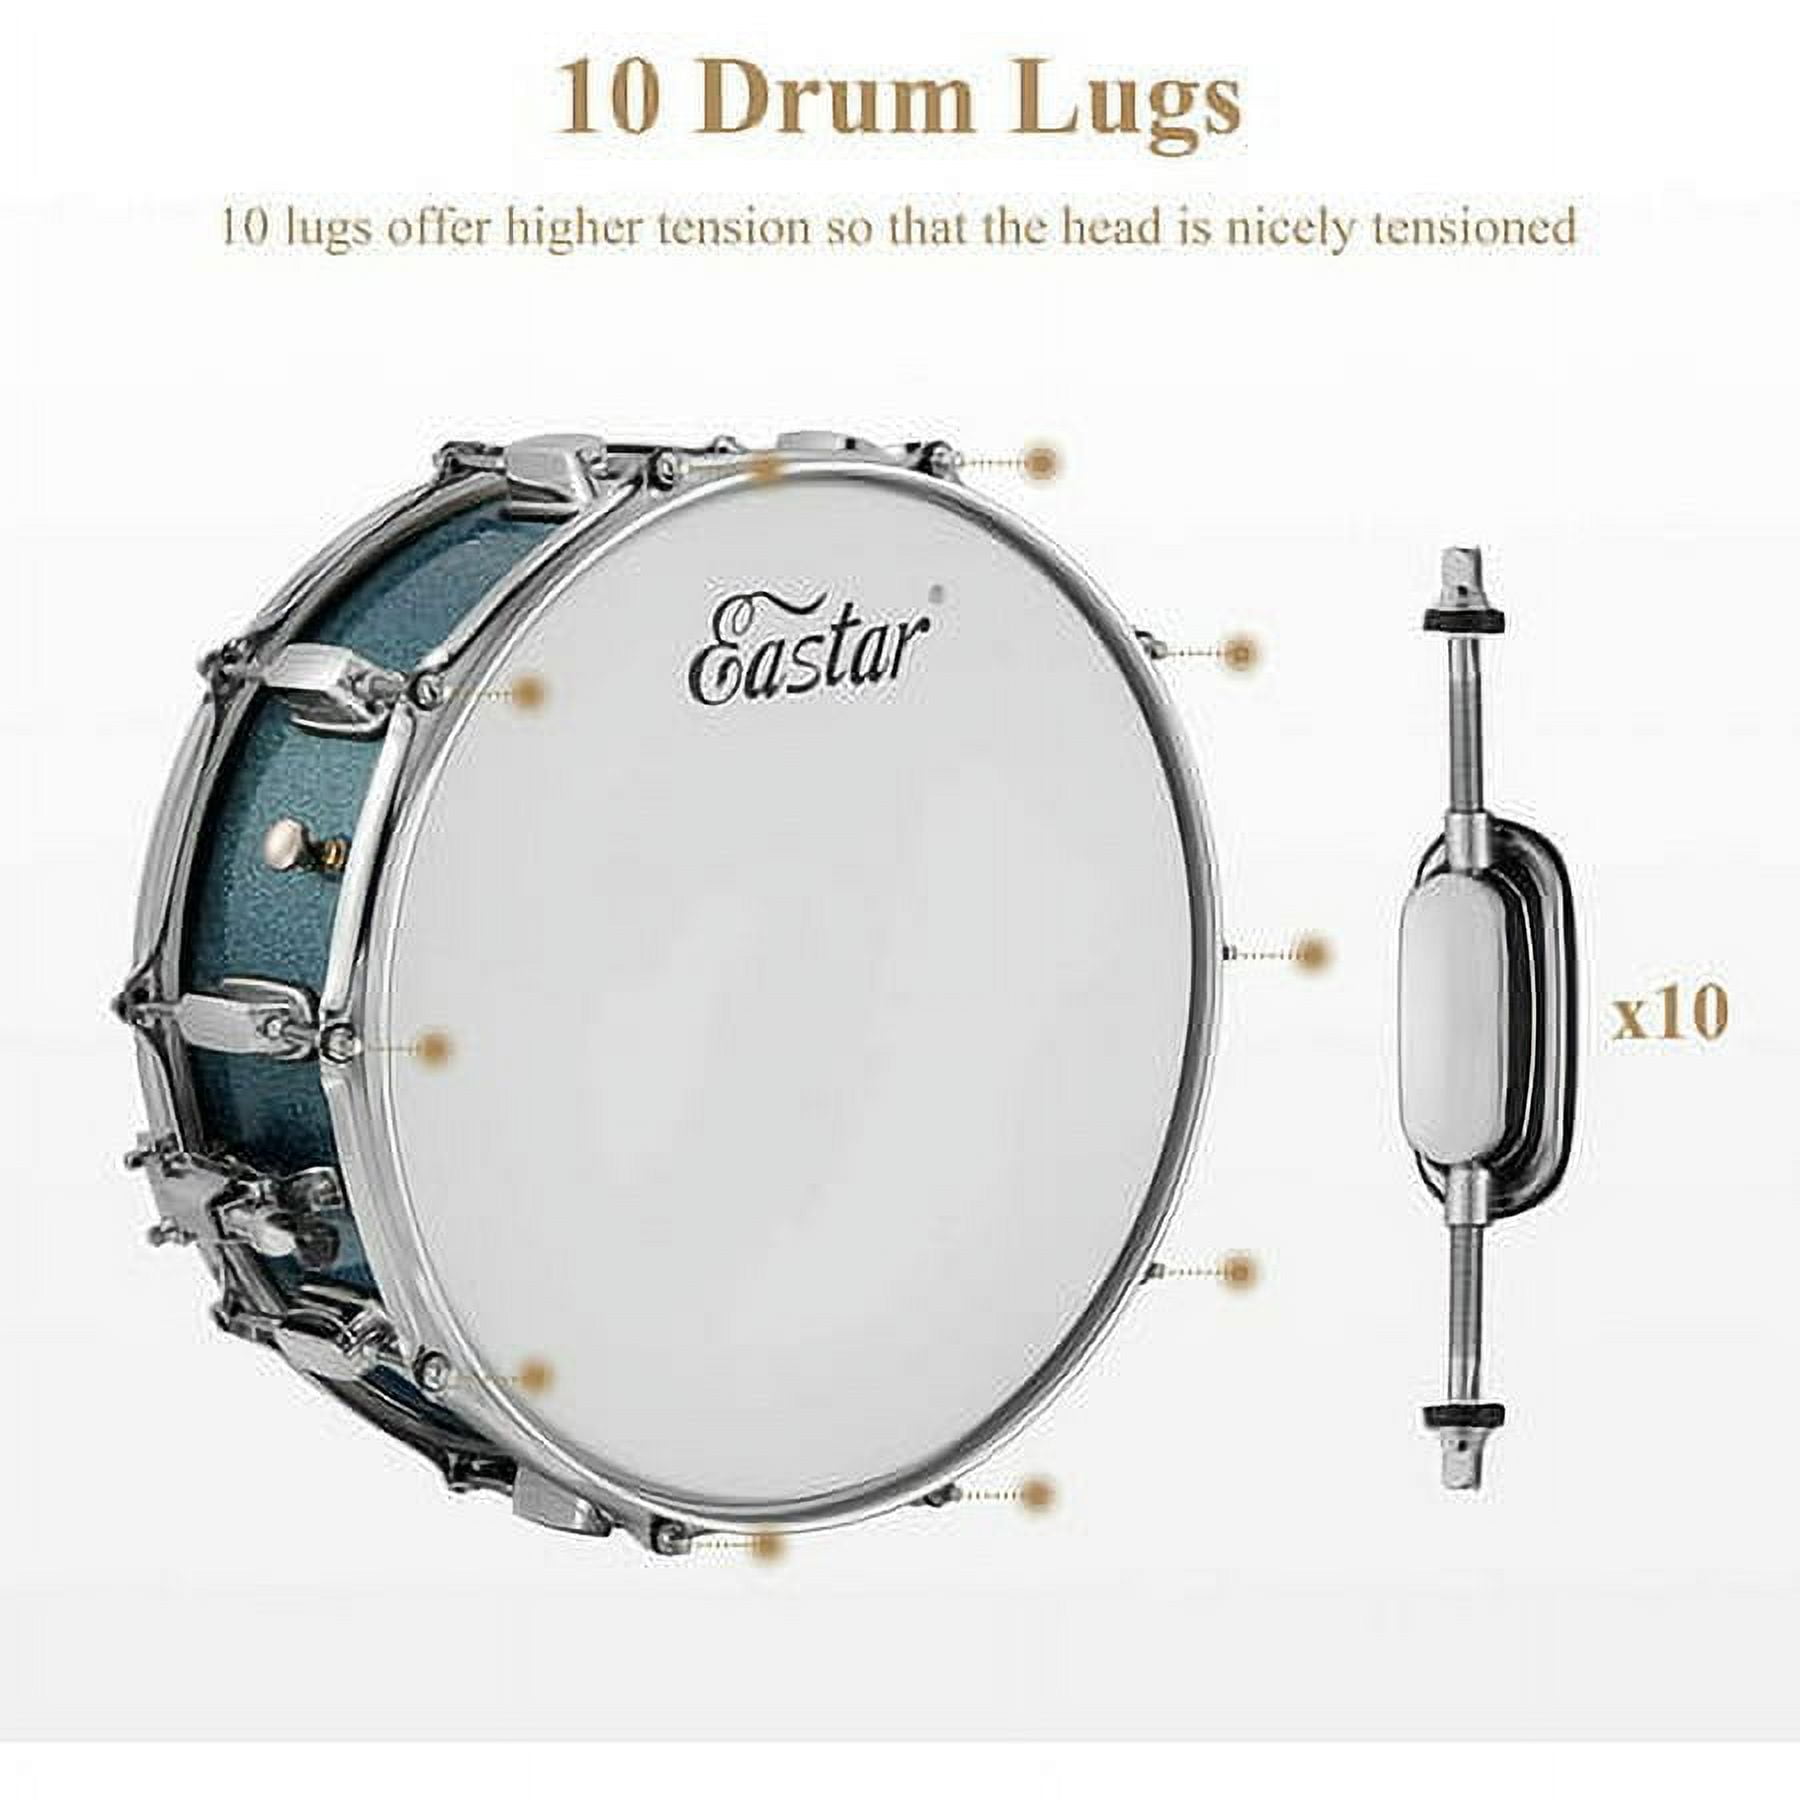 Eastar Pad Beginner Drum Blue Student Set Mute with Practice Snare Sticks, Starry Kit, Stand,